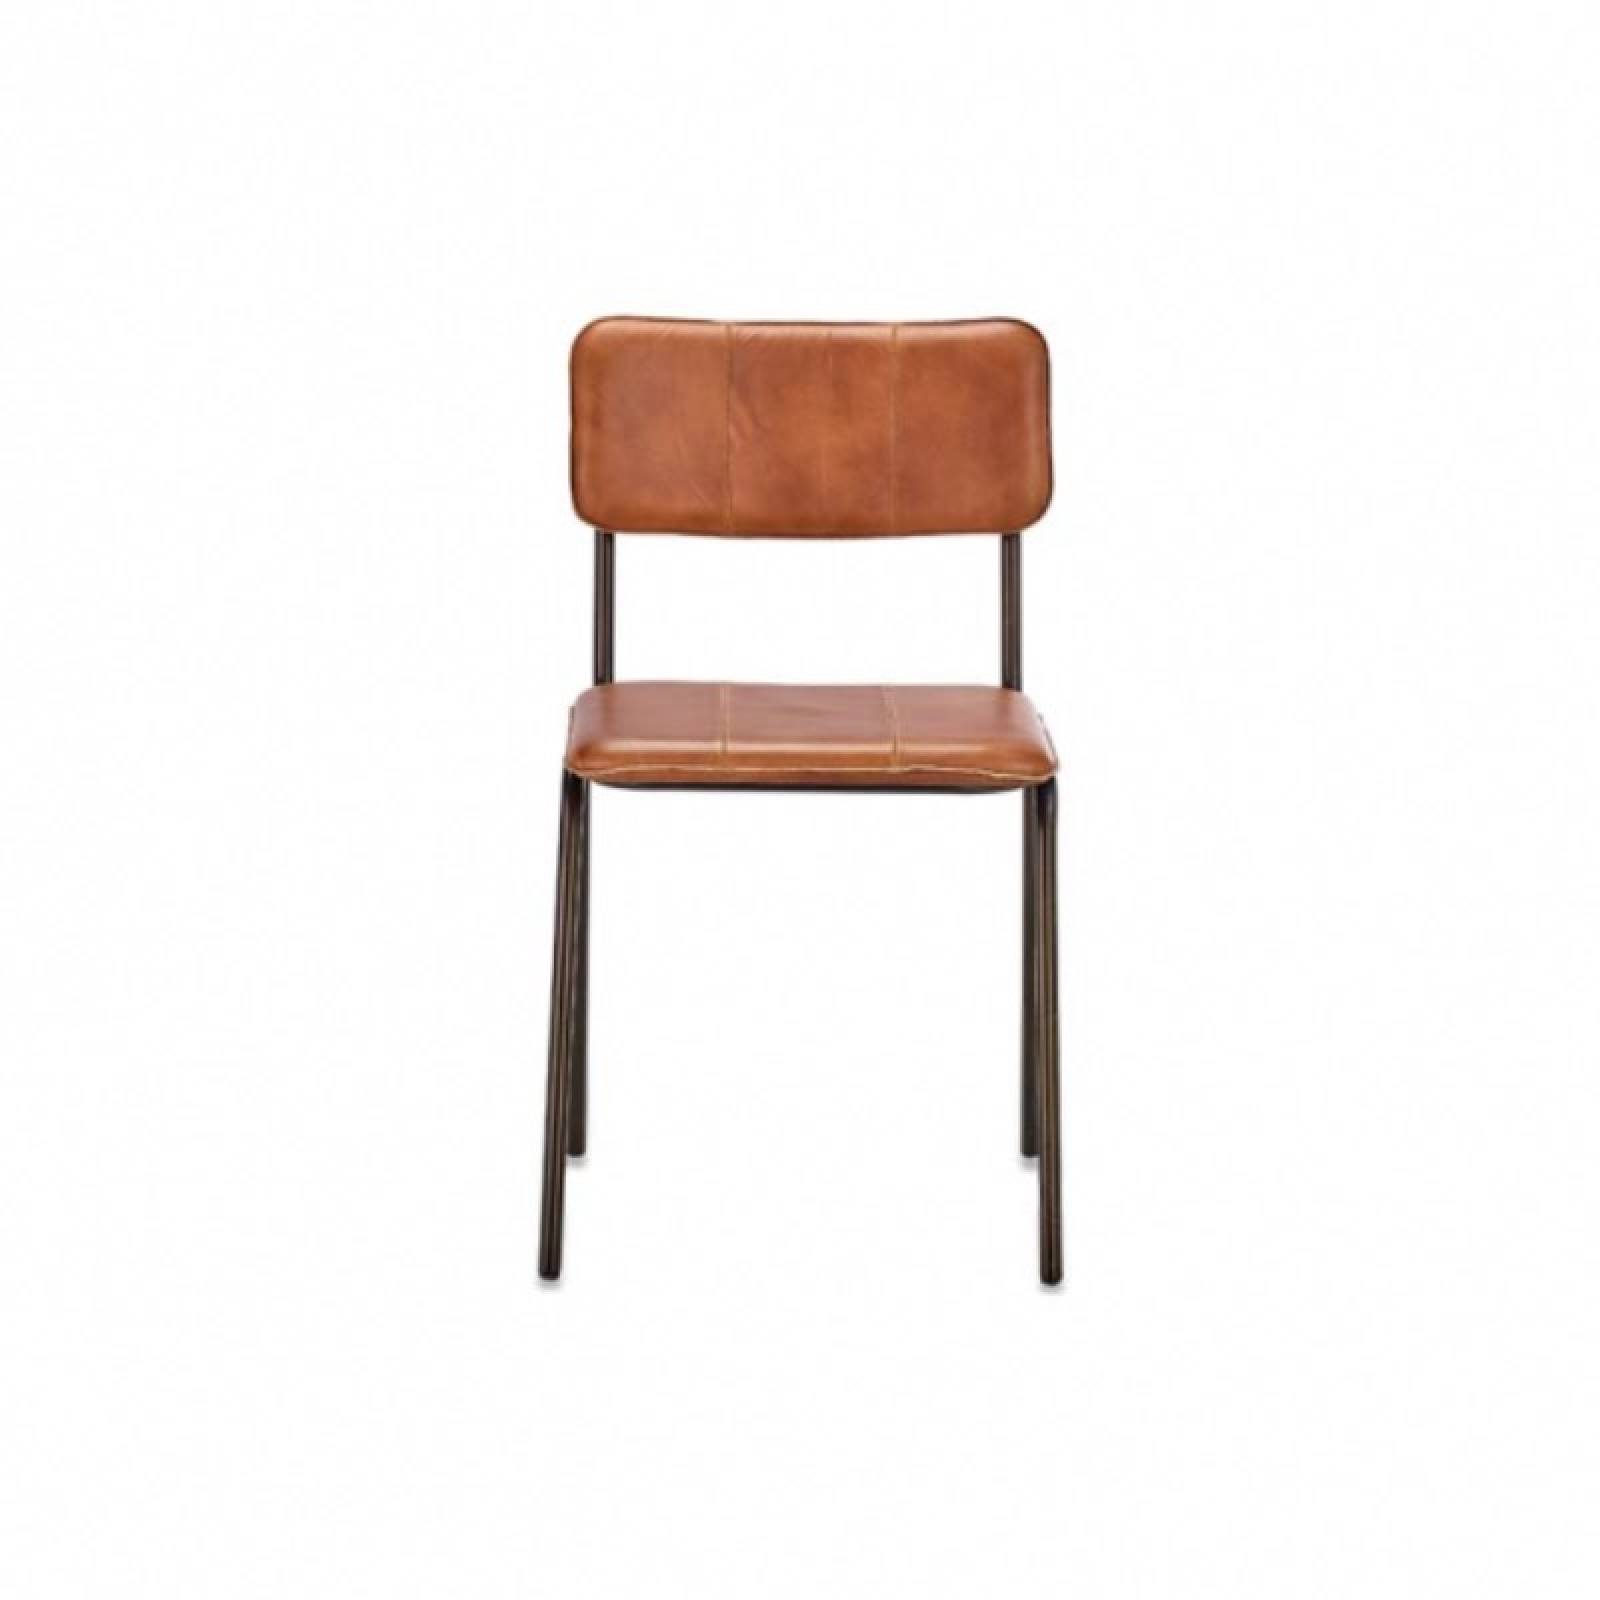 Industrial Style Metal Dining Chair In Tan Leather thumbnails